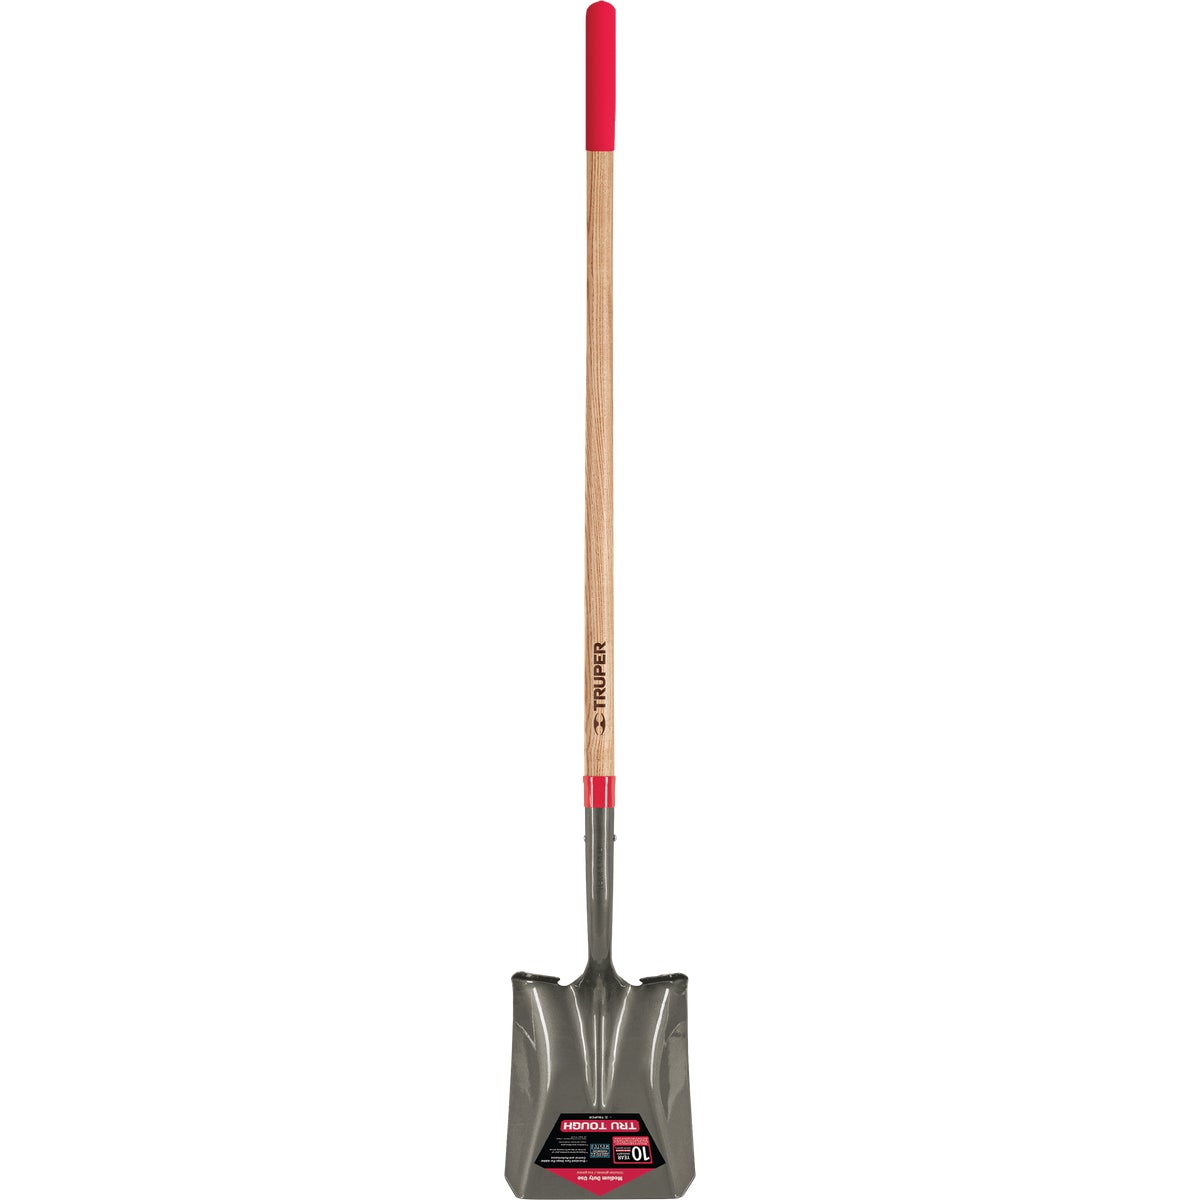 Item 700384, Tru Tough long handle square point shovel features: extended step, 48 In 